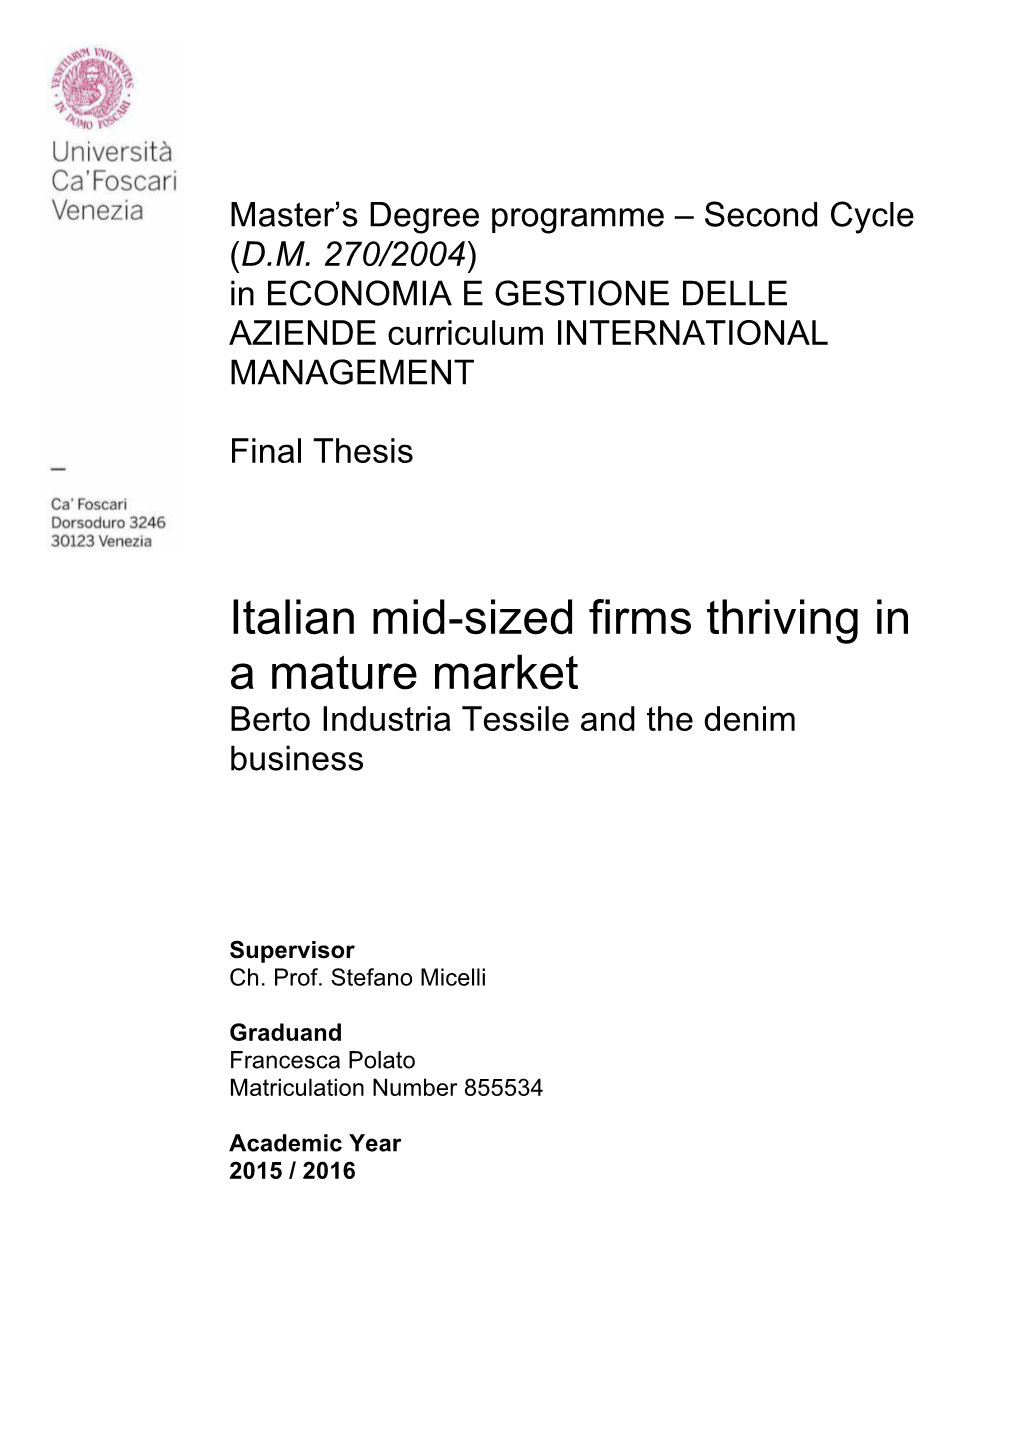 Italian Mid-Sized Firms Thriving in a Mature Market Berto Industria Tessile and the Denim Business